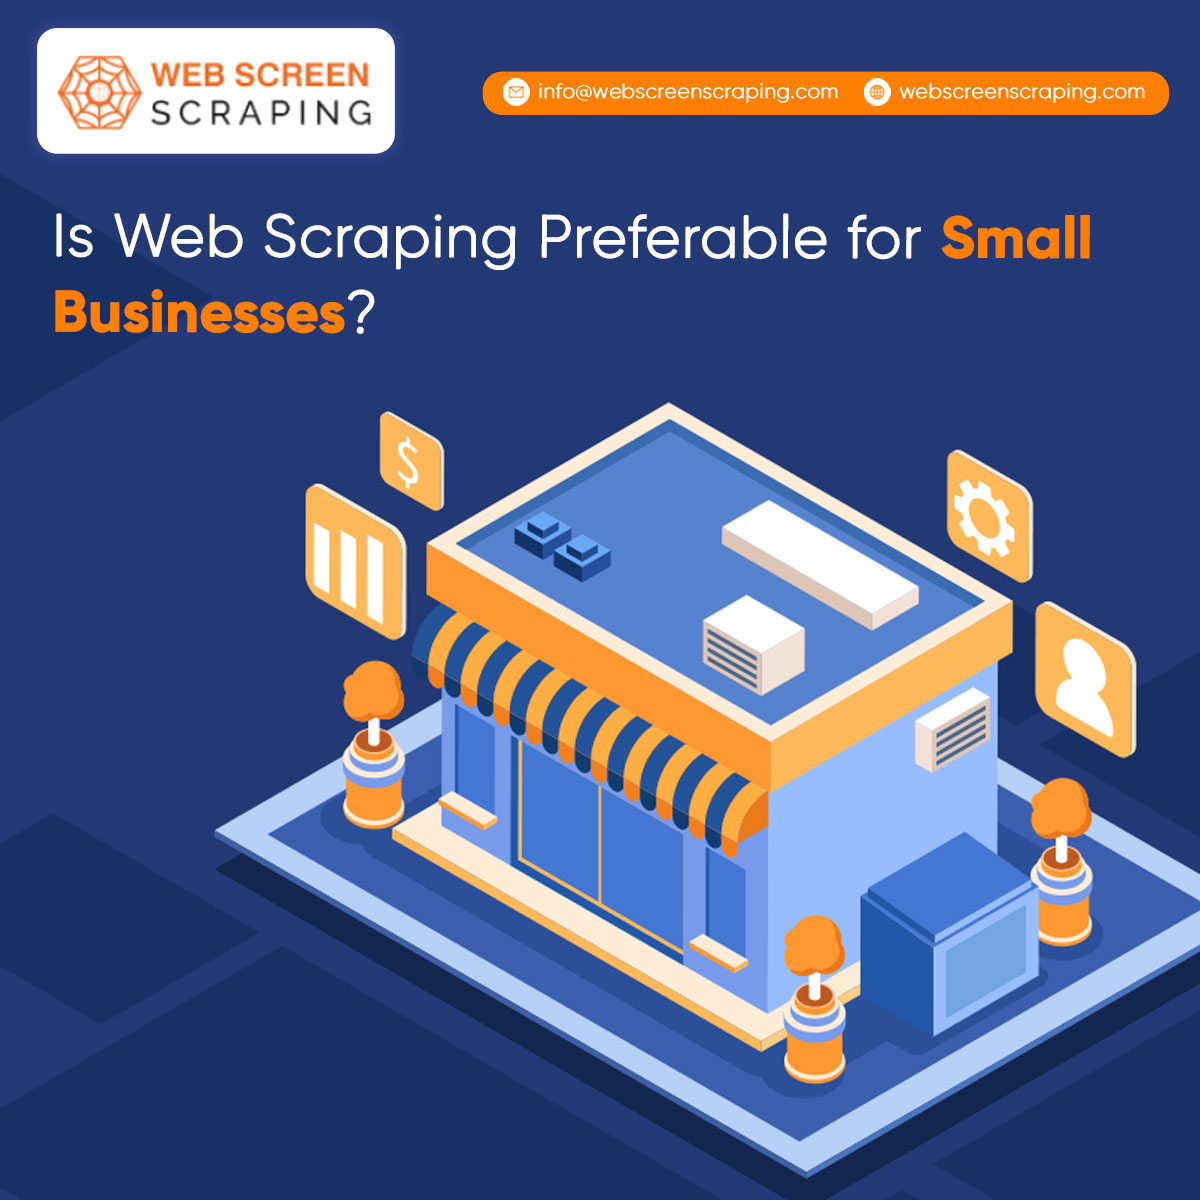 Explore why web scraping is the preferred method for small businesses. Harness #datadriveninsights, automate processes & gain a #competitiveedge without breaking the bank. Empower your growth with web scraping.
webscreenscraping.com/web-scraping-f…

#WebScraping #SmallBusinessAdvantage